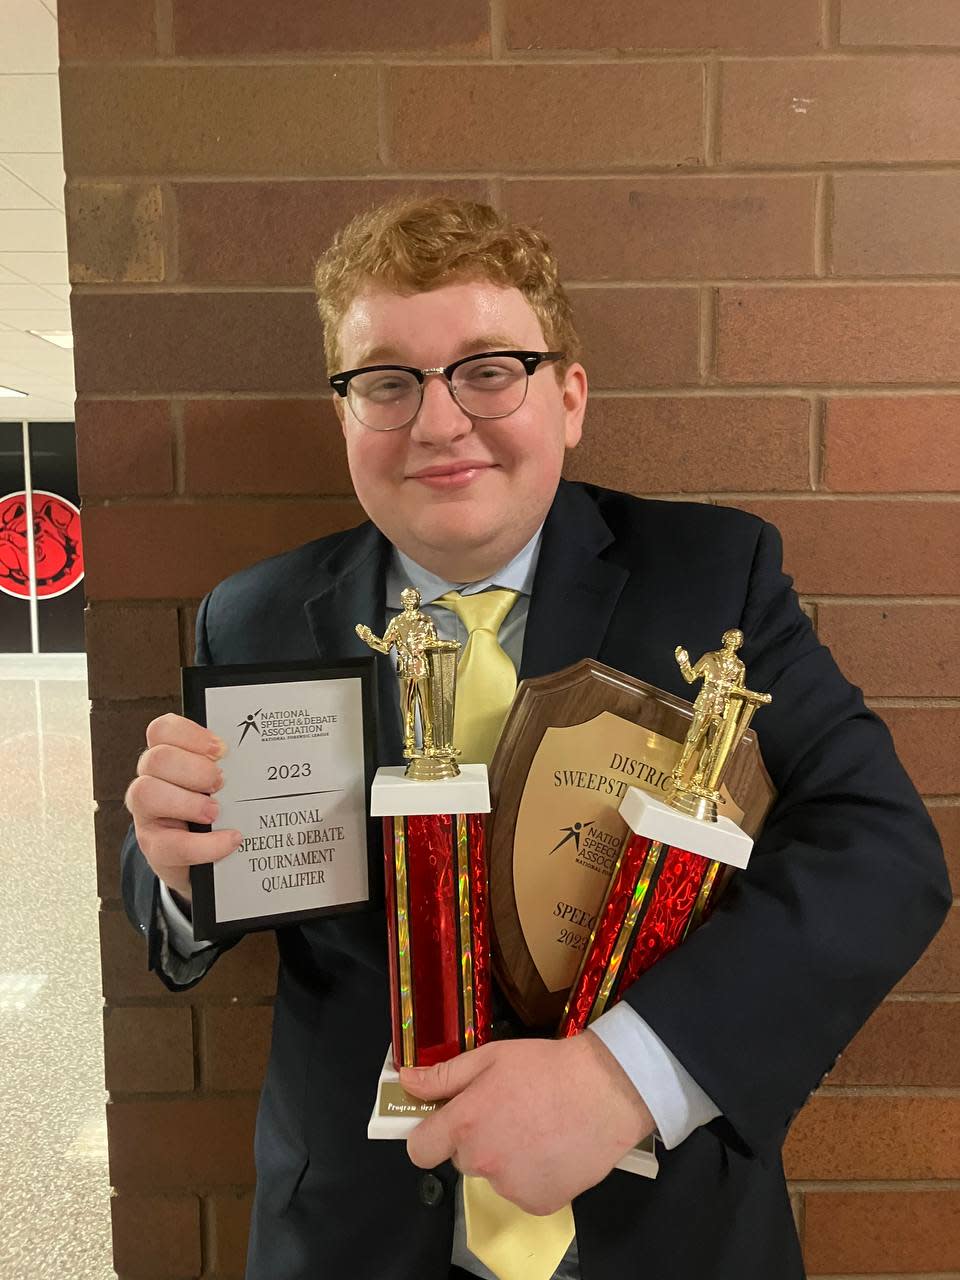 Jason Folk won in both Original Oratory and Program Oral Interpretation, becoming the first competitor in Eastern Ohio’s history to win districts in two events.